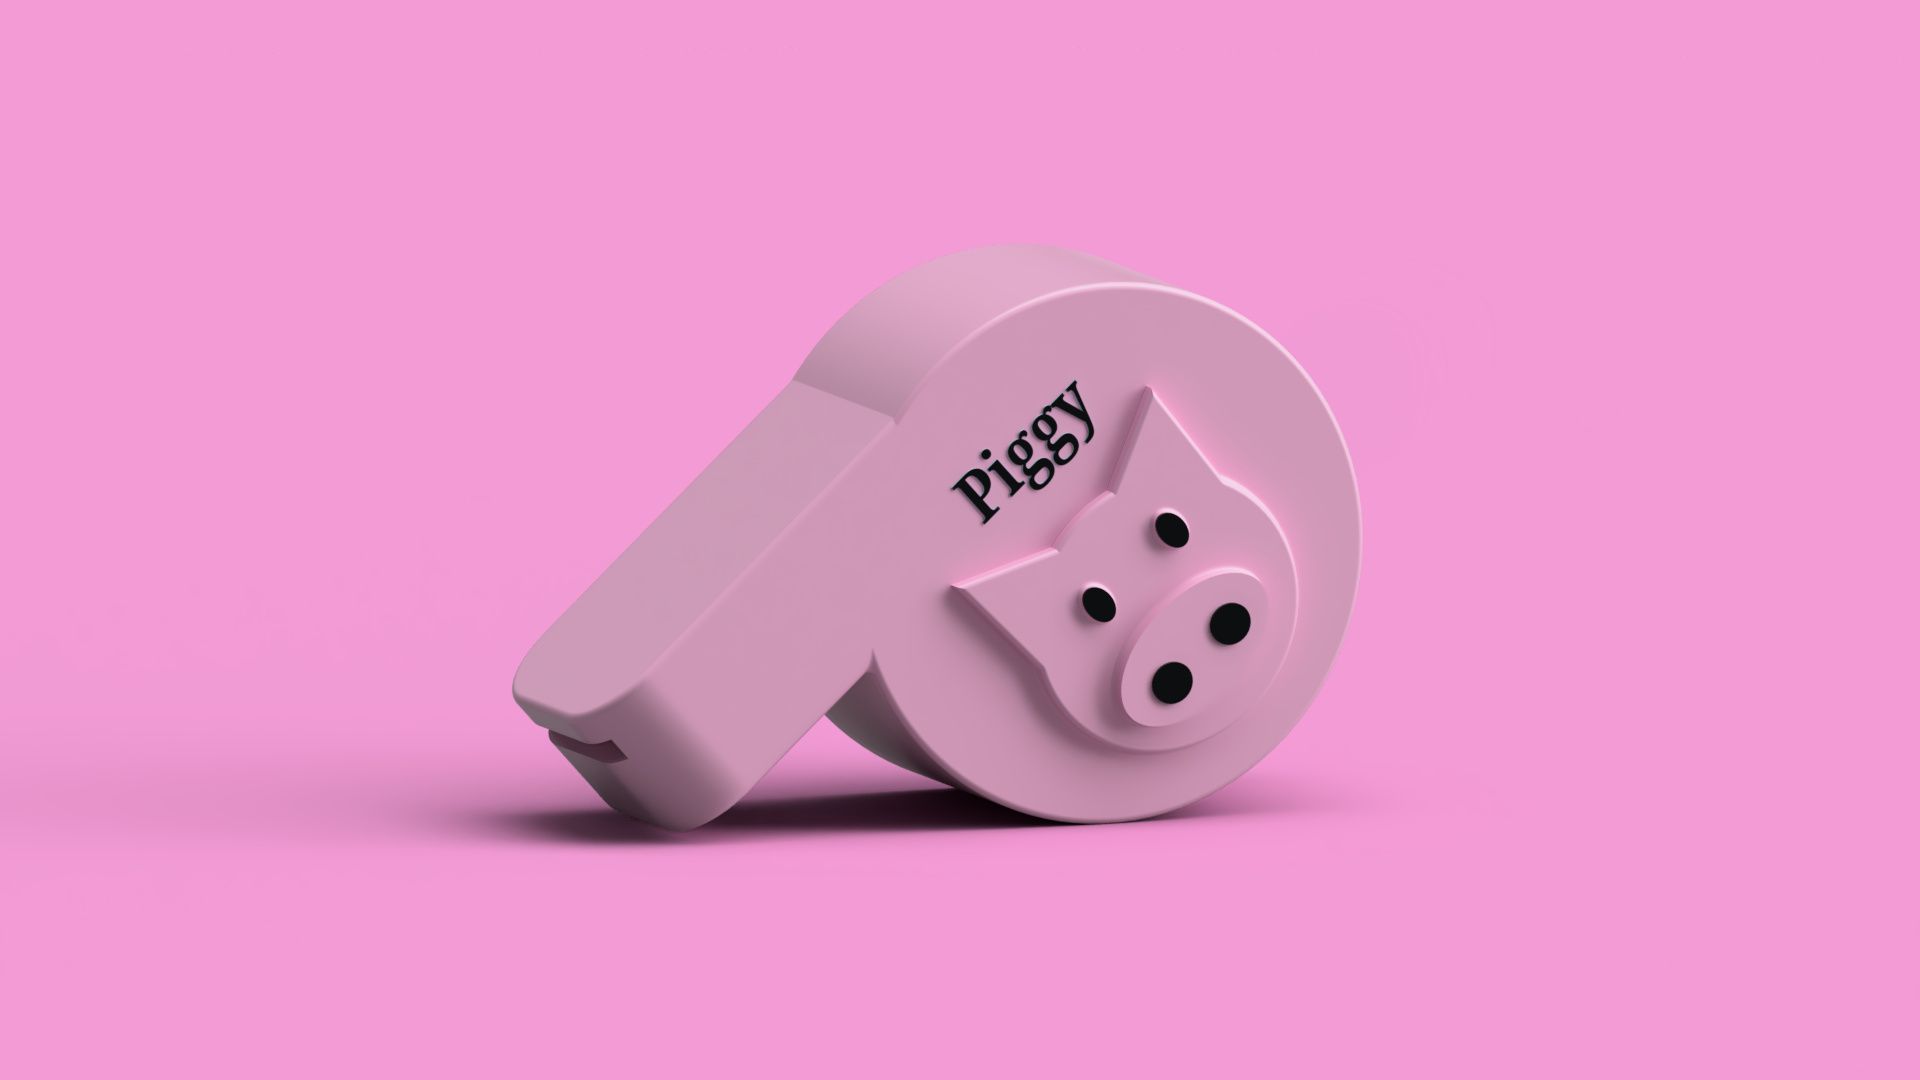 Pink, pig-themed whistle - rendered in Fusion 360 software.